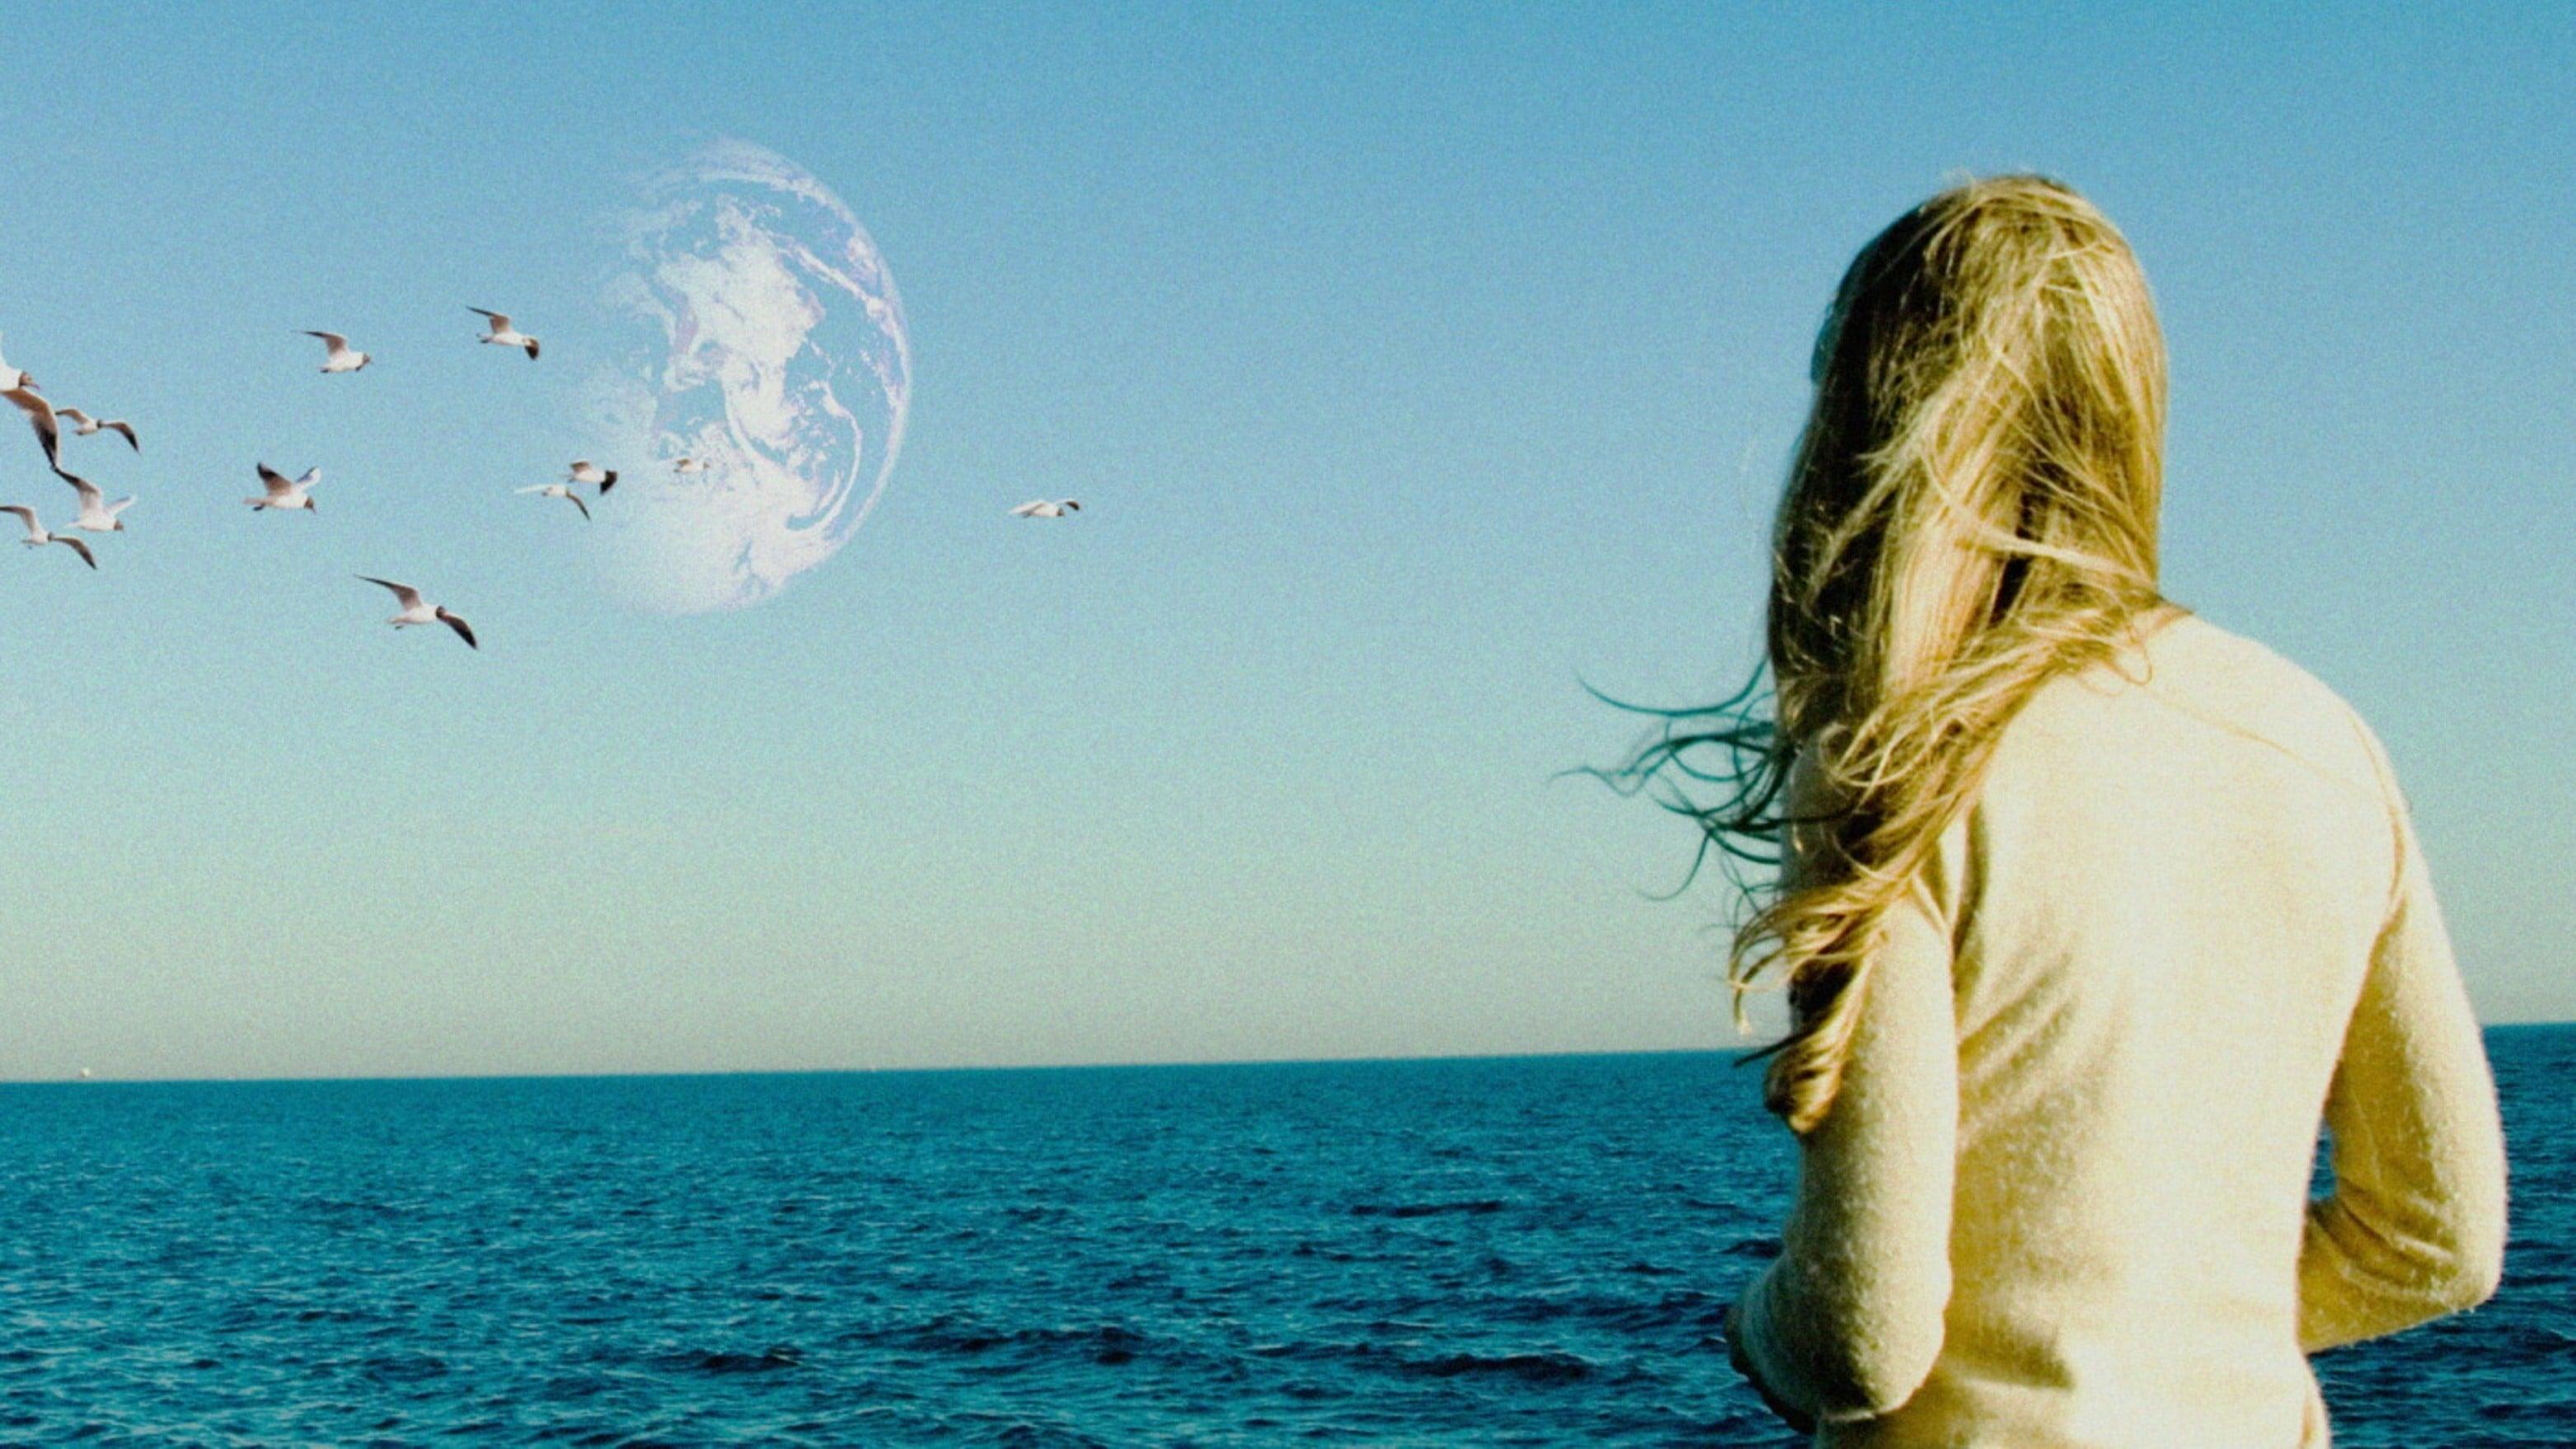 Another Earth backdrop